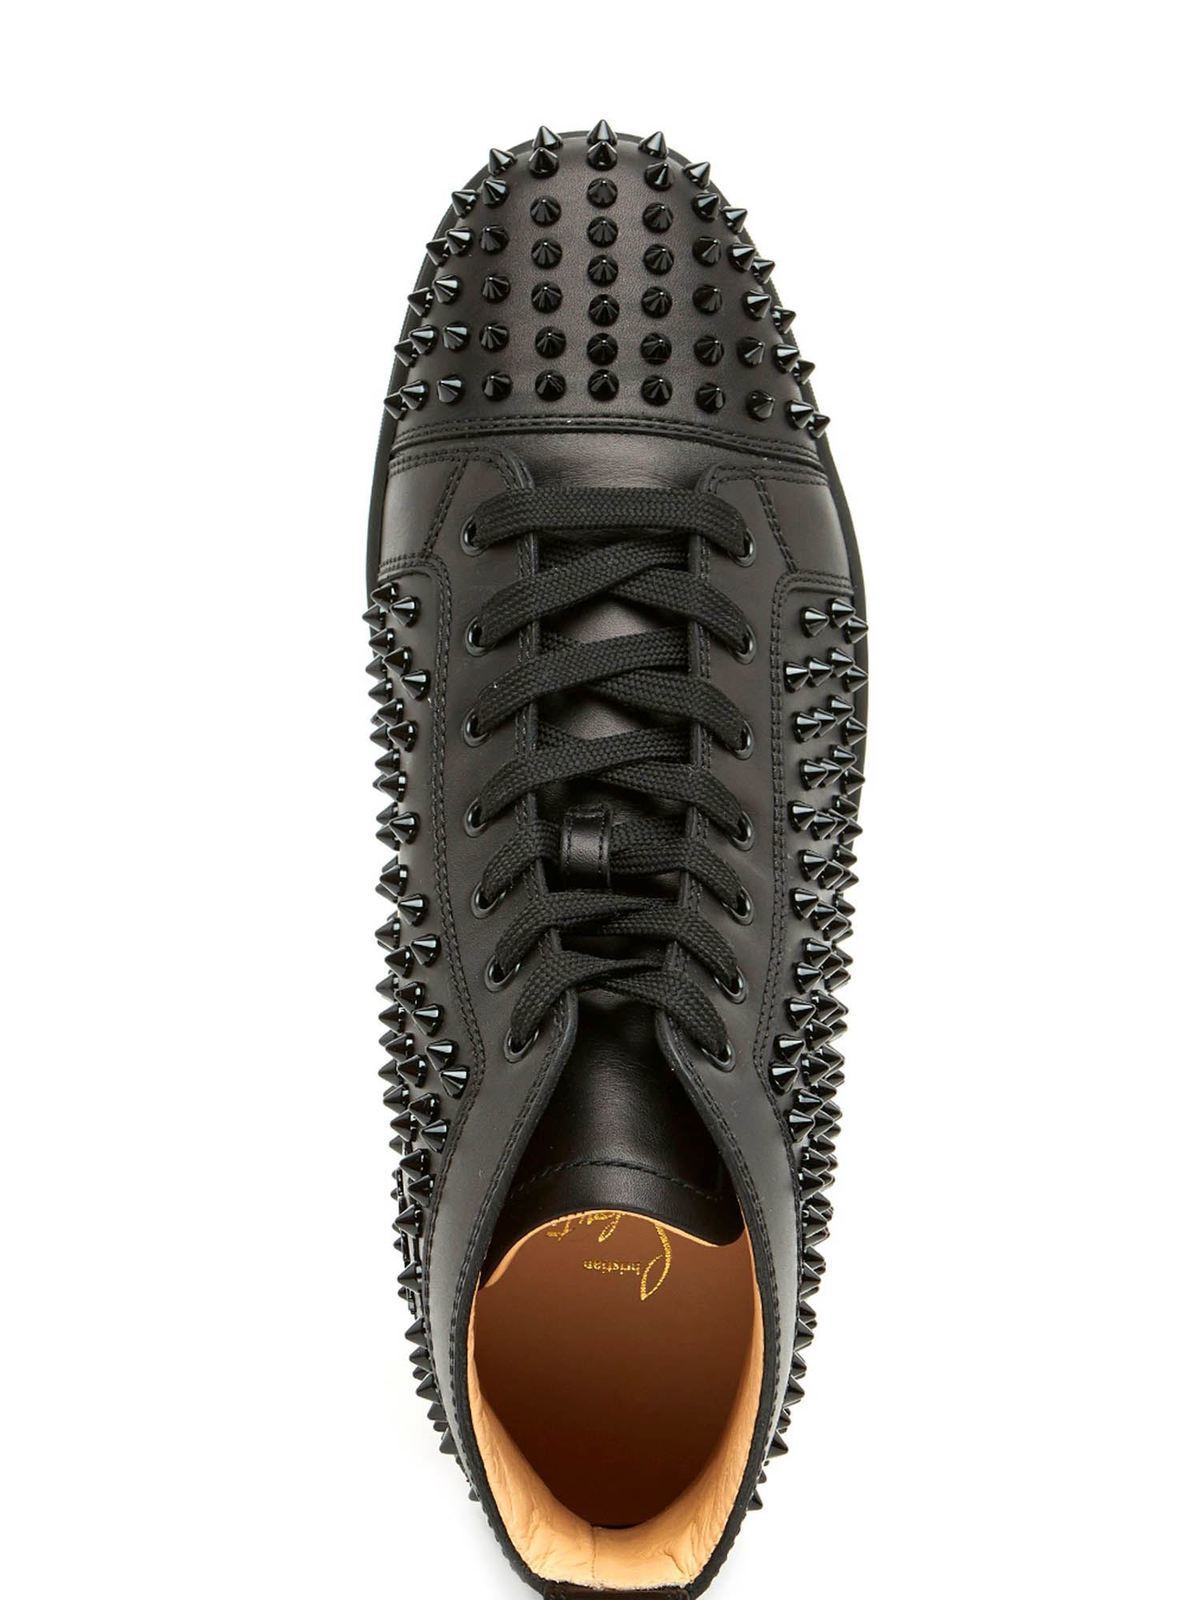 Trainers Christian Louboutin - Louis Orlato Spikes sneakers in